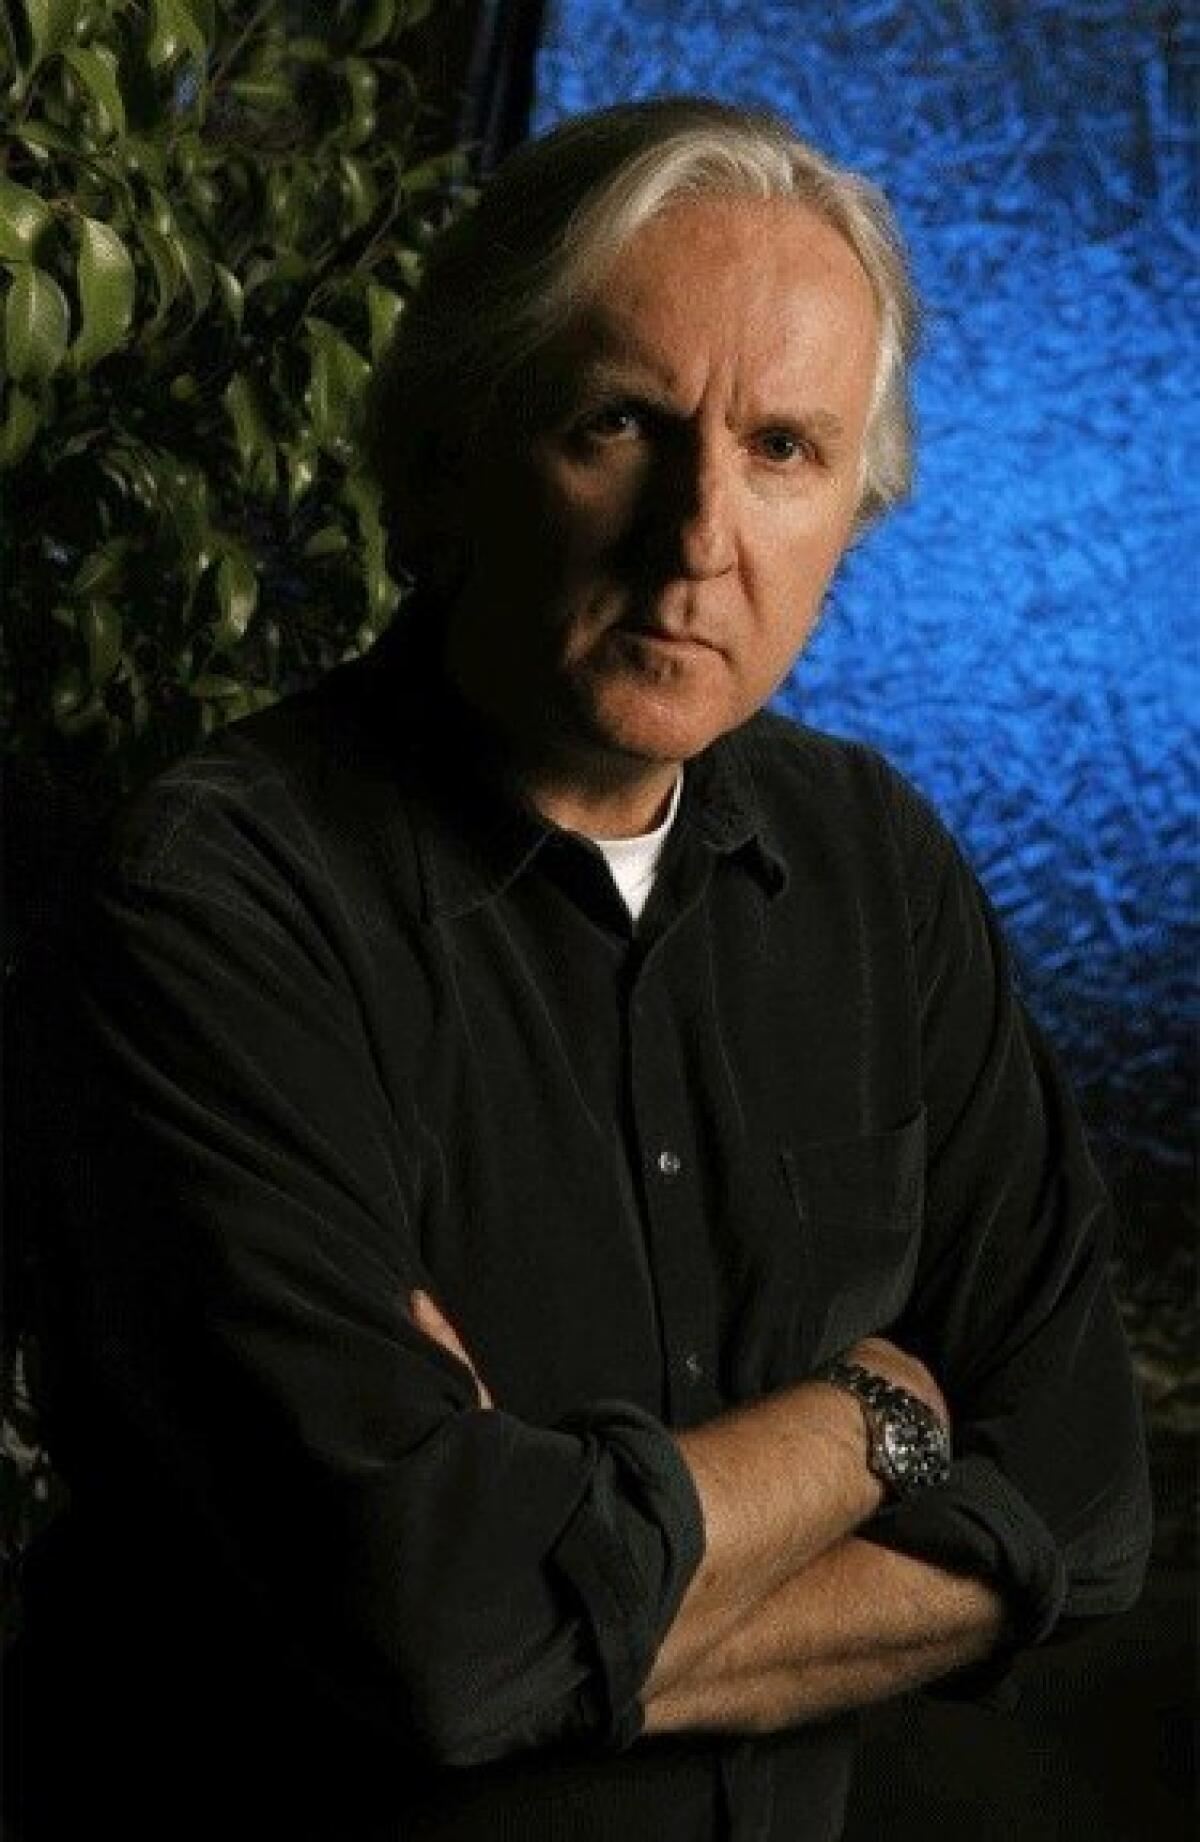 James Cameron, the science-enthralled director and underwater explorer, is seen in 2010.